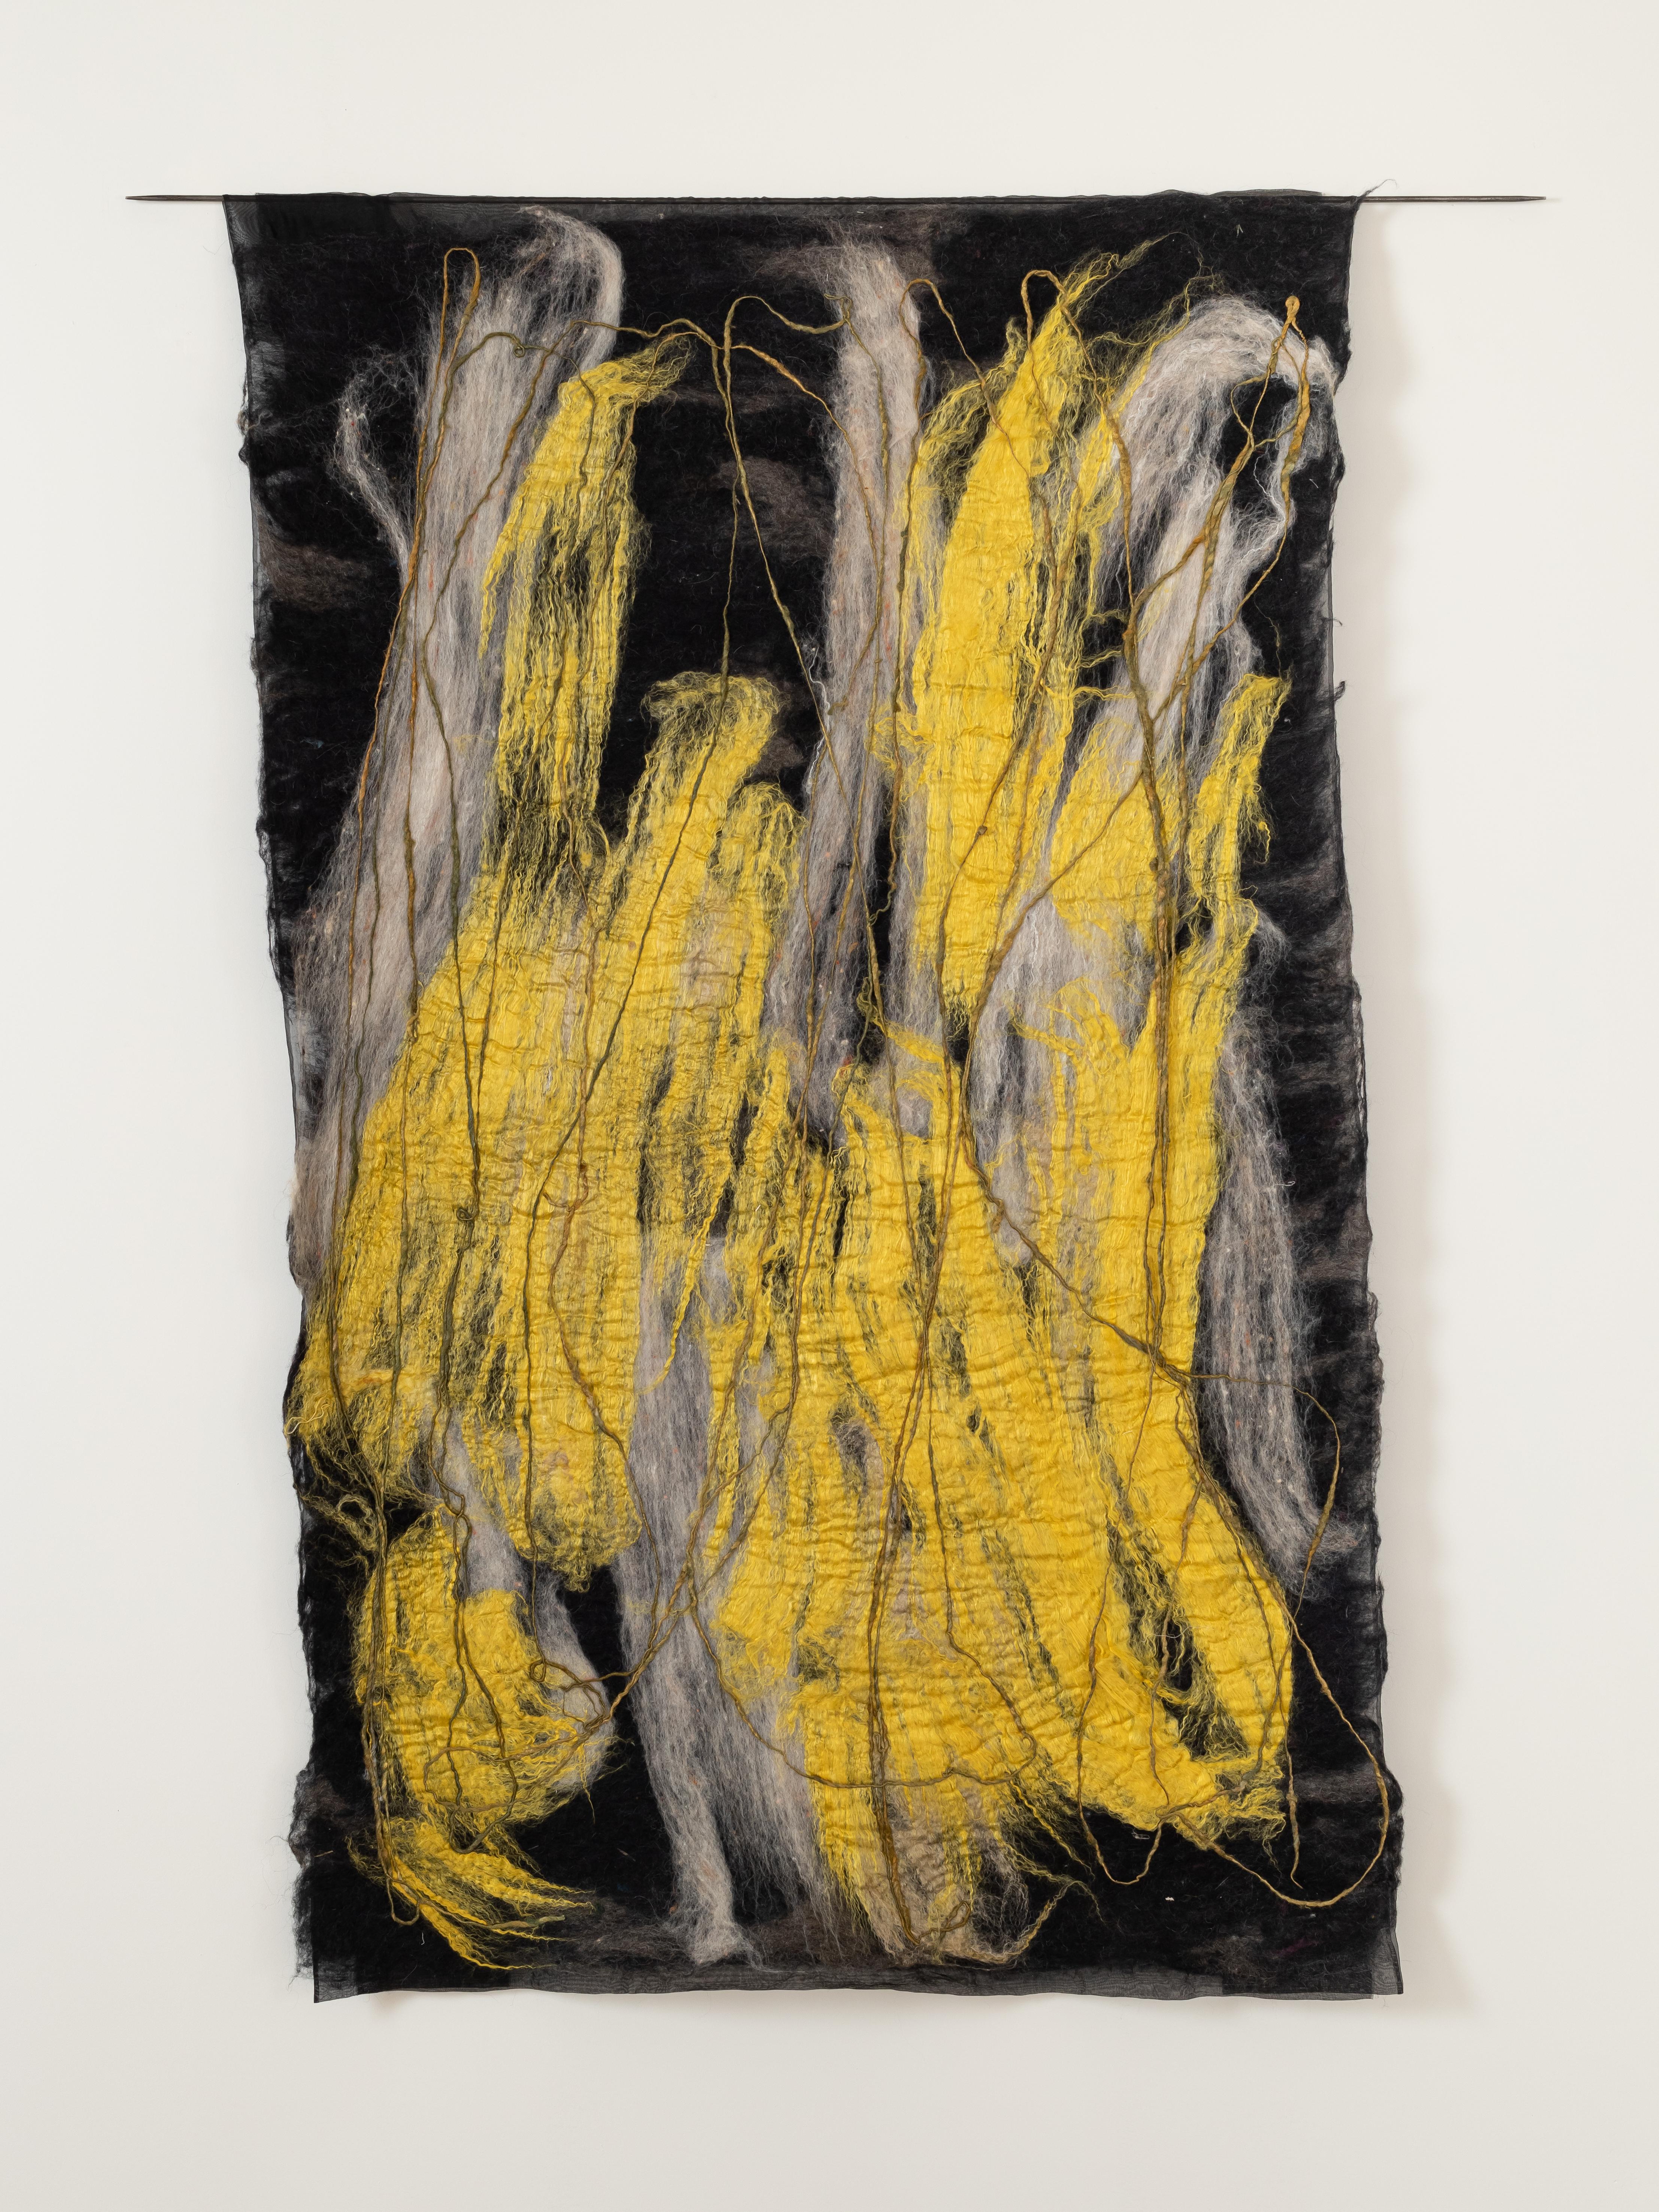 Lemon Burst II Tapestry by Claudy Jongstra
One of a kind.
Dimensions: W 115 x H 180 cm.
Materials: Drenth Heath, Raw Silks, Merino, Silk Organza.

Claudy Jongstra is known worldwide for her monumental artworks and architectural installations,